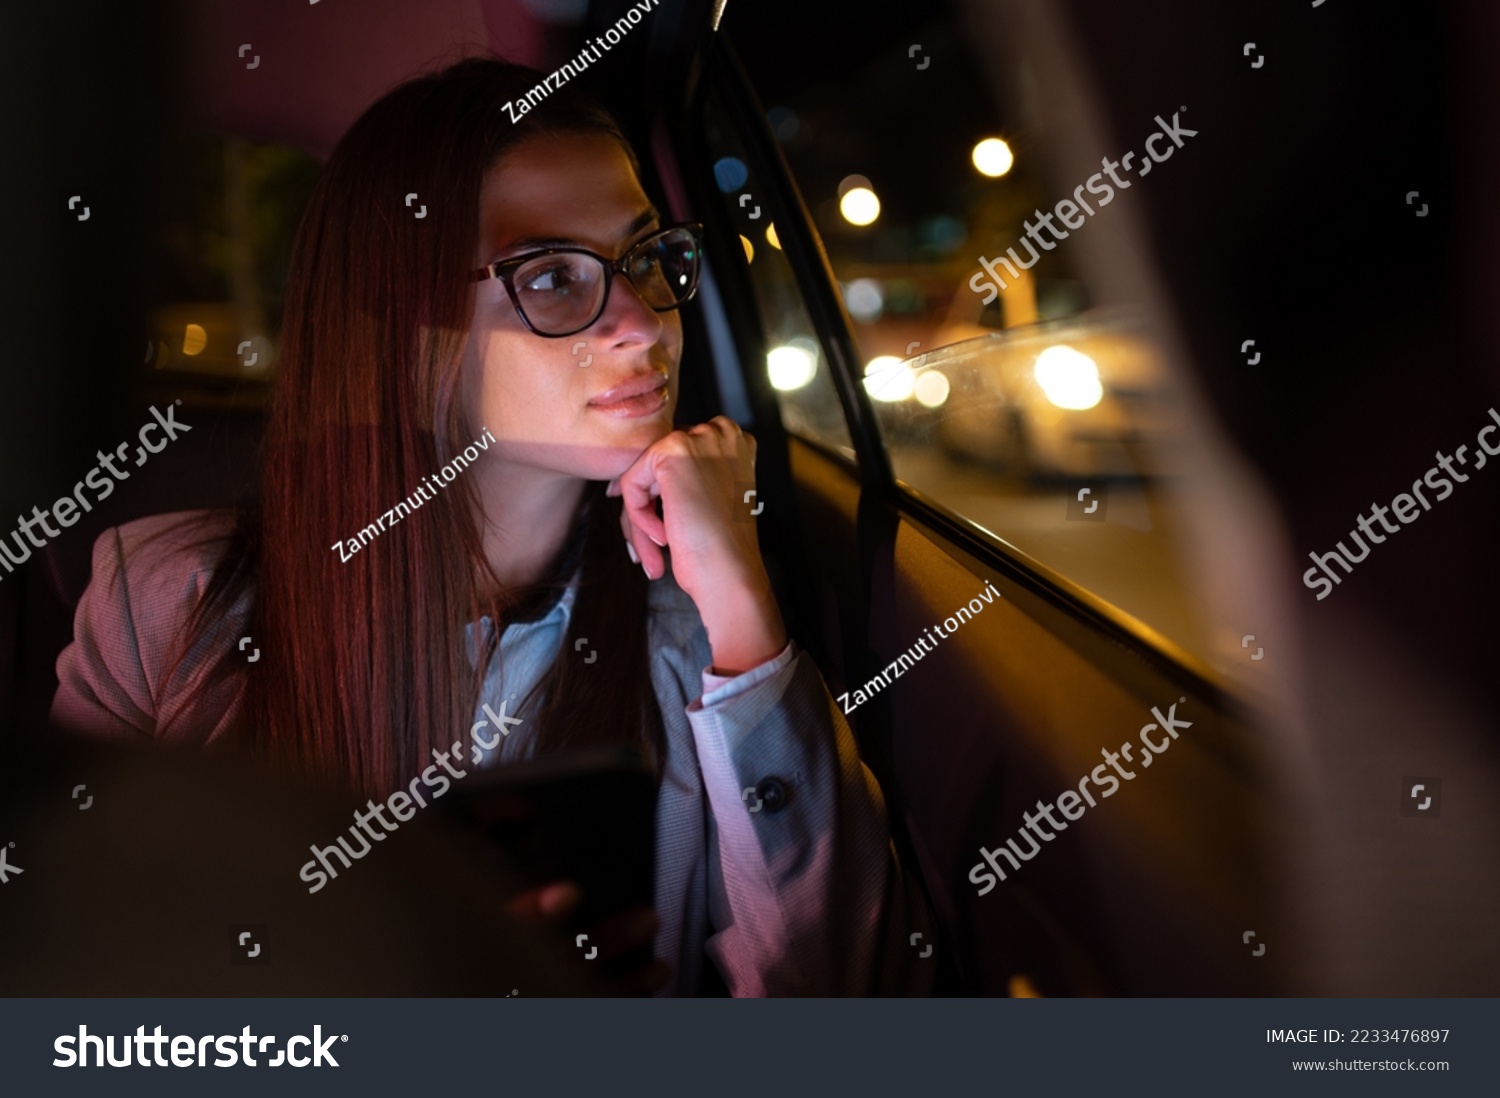 Successful young businesswoman in fashion office clothes working late and using smartphone and looking trough the window while sitting in a backseat of car in urban modern city during night. #2233476897